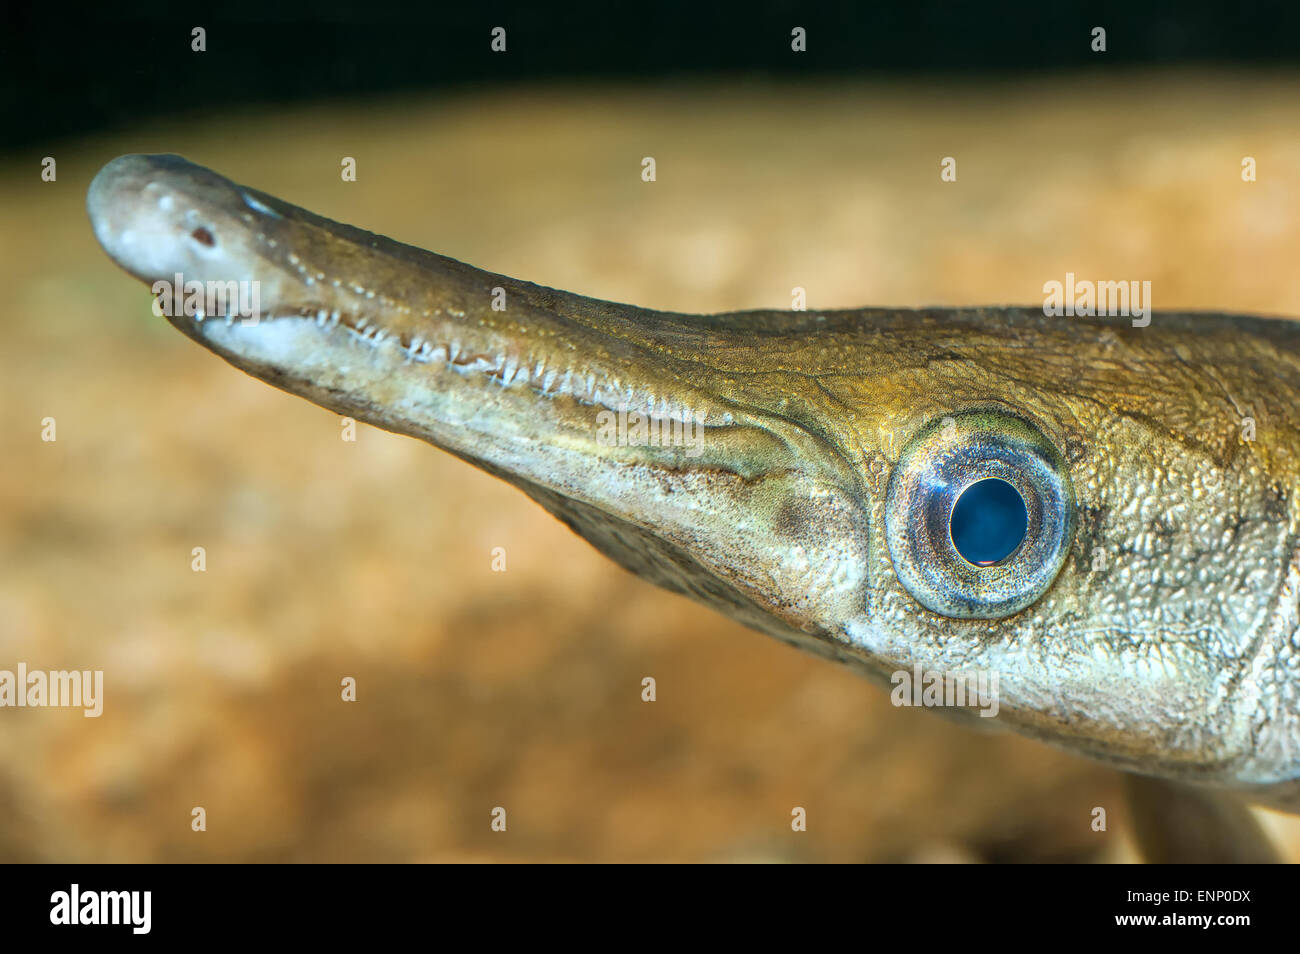 Nice detailed view of crocodile fish head with blurred background. Stock Photo